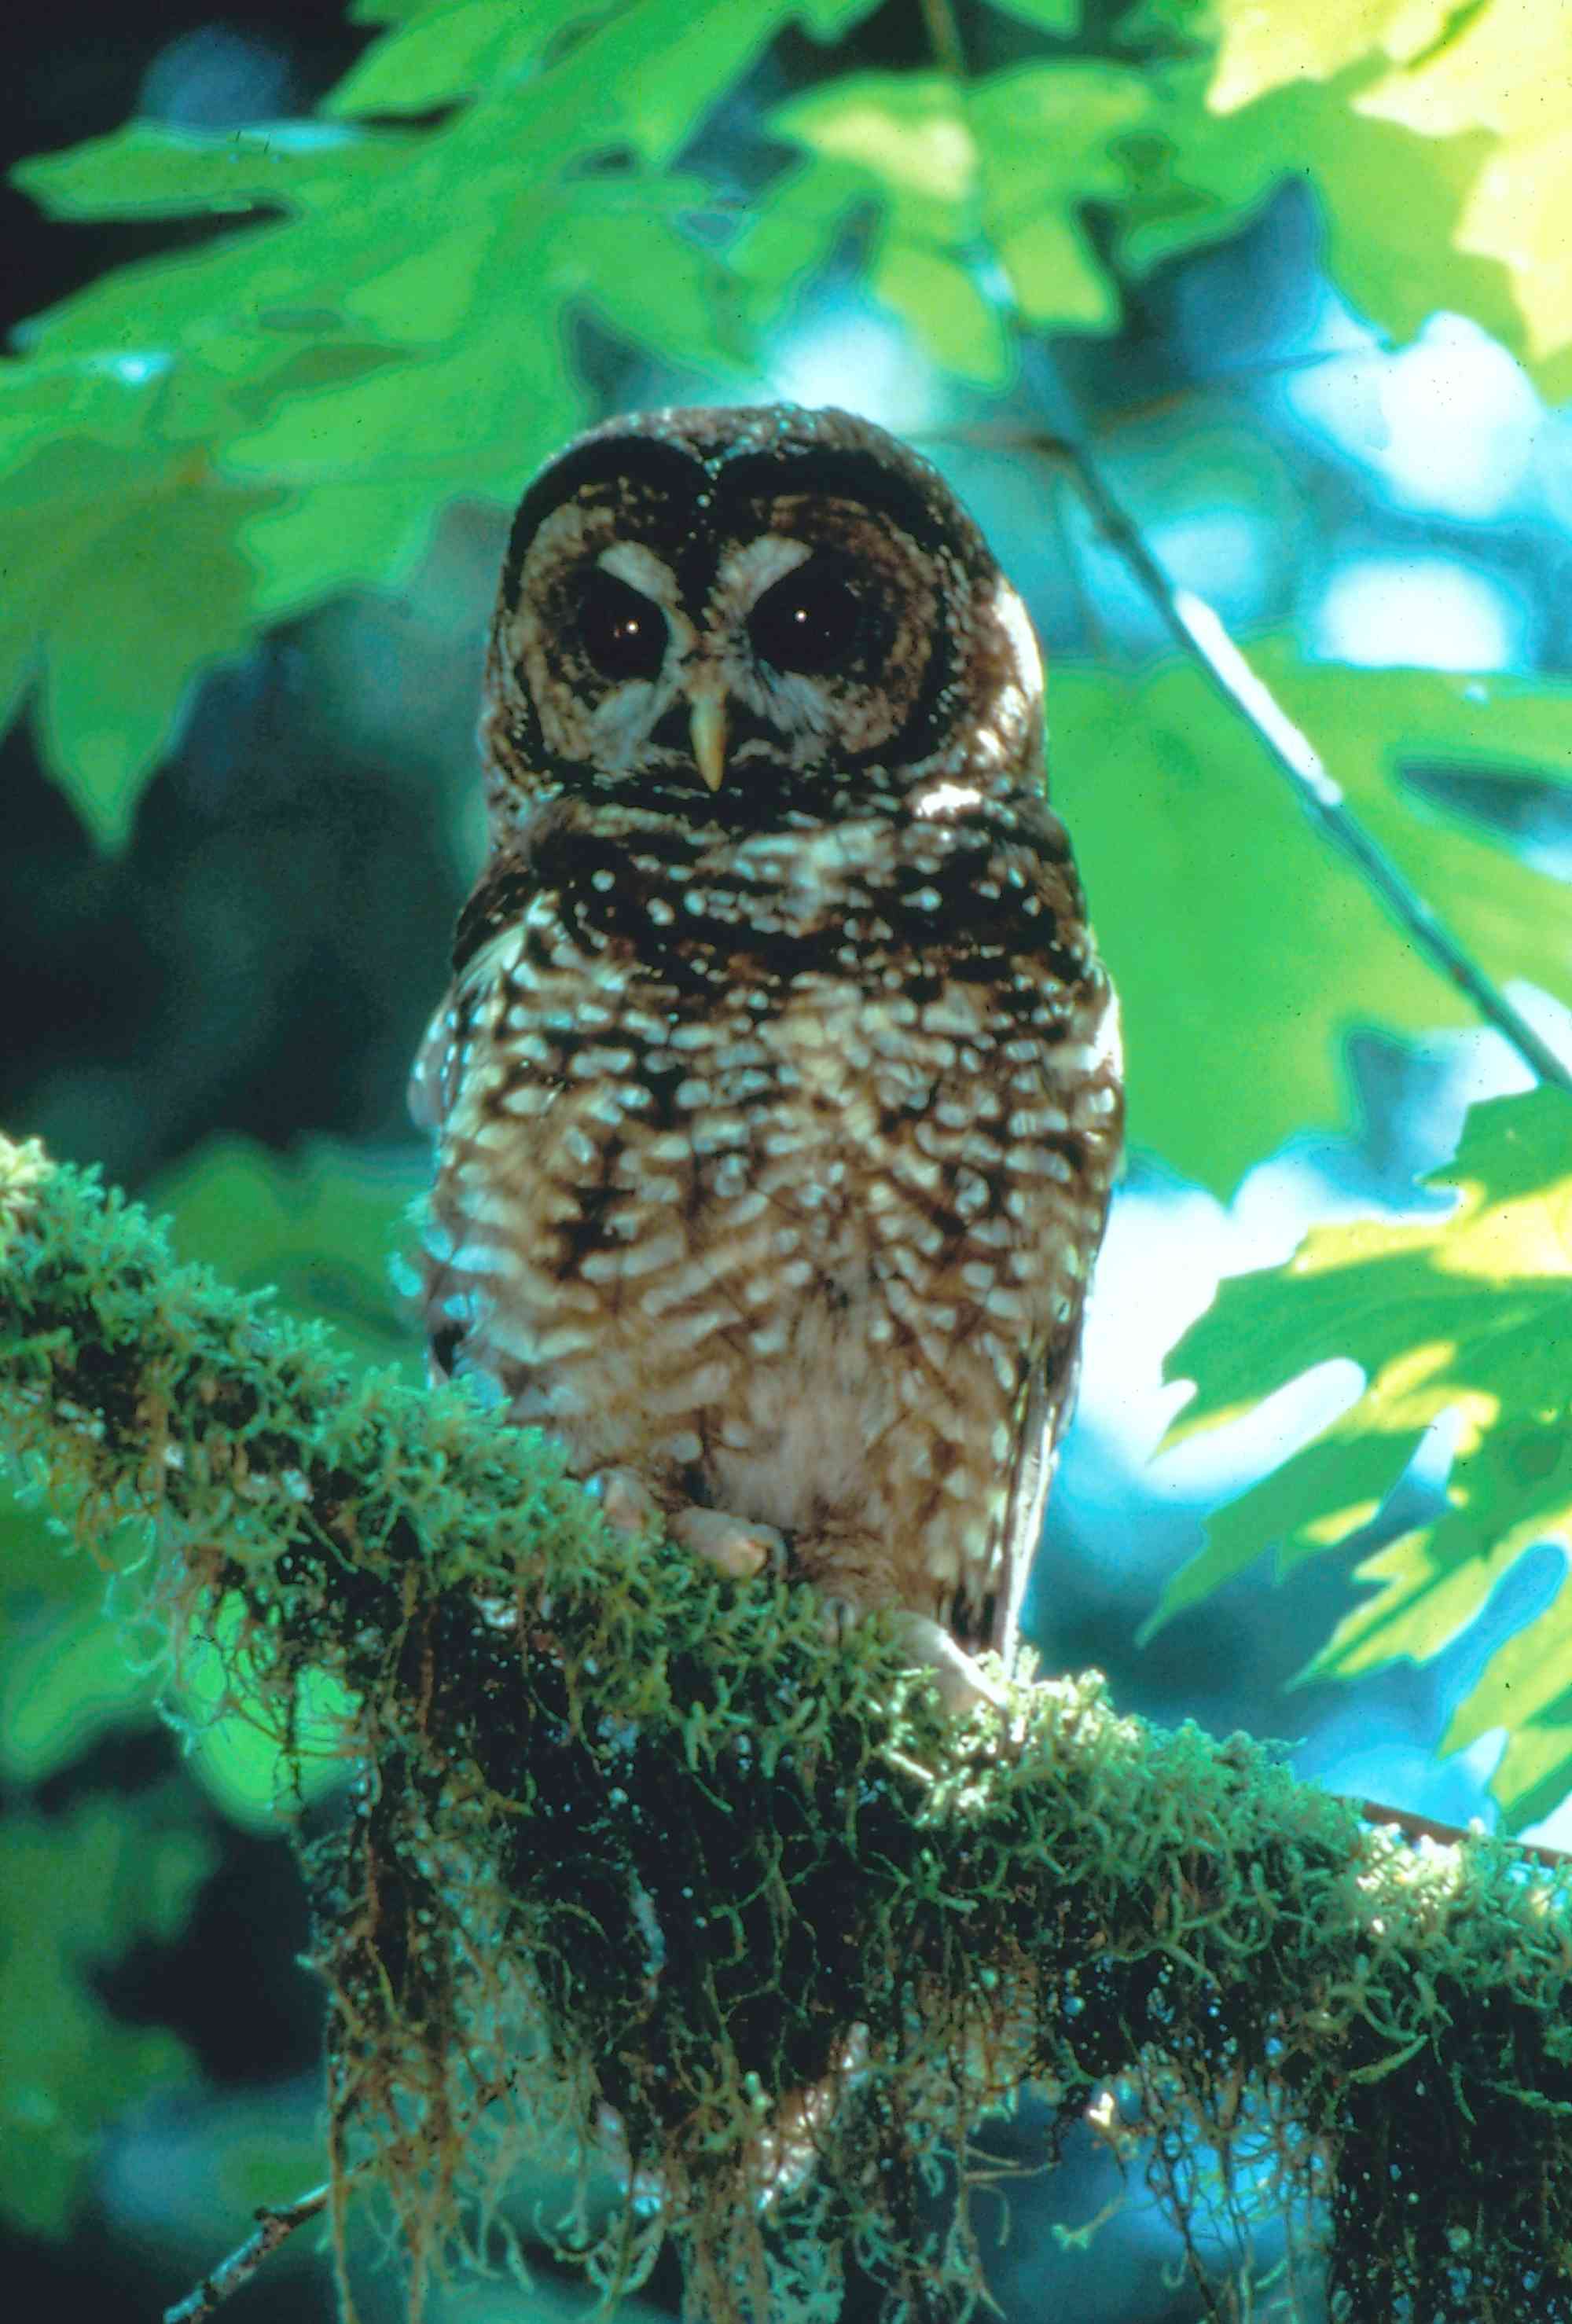 Northern spotted owl sitting on branch